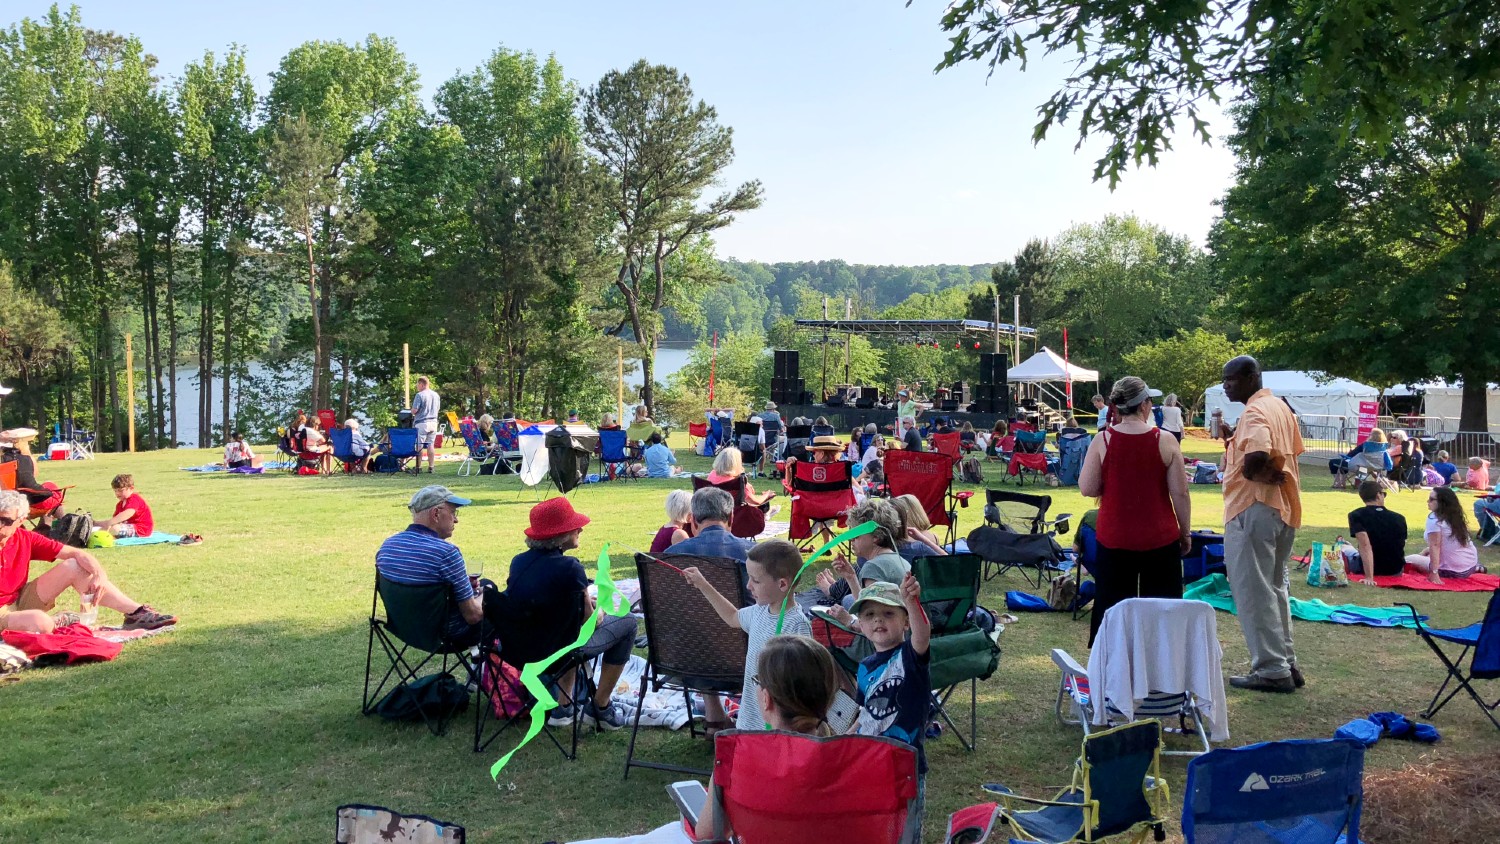 A crowd gathers on the lawn for a concert